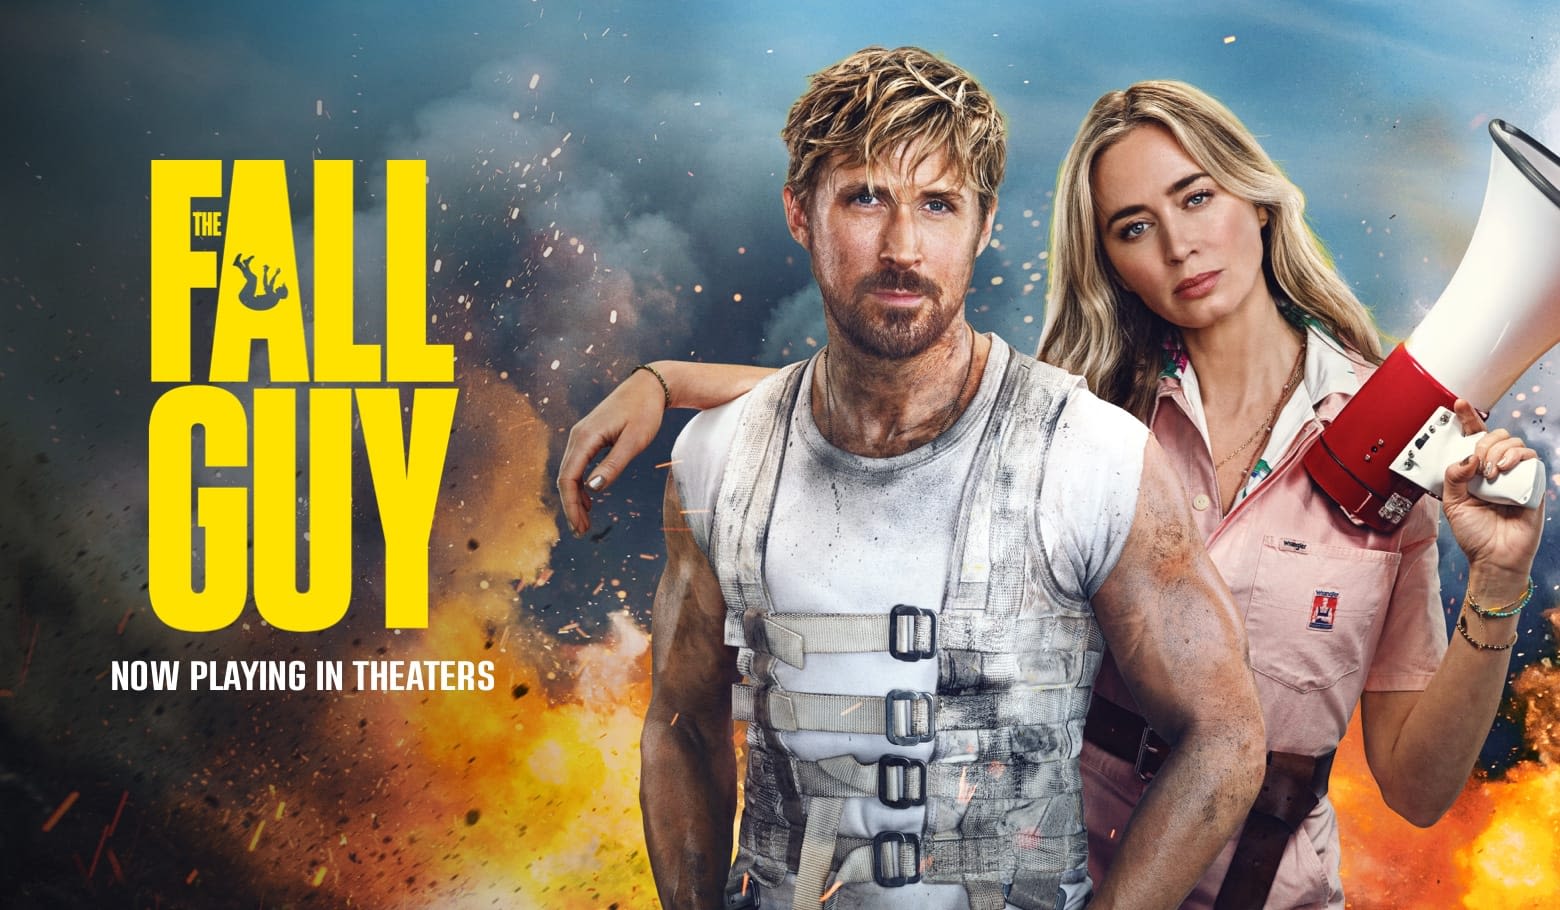 Box Office: "The Fall Guy" Not Connecting with Audiences, Sees $25 Mil Opening Weekend Despite Top Reviews, Solid Word...